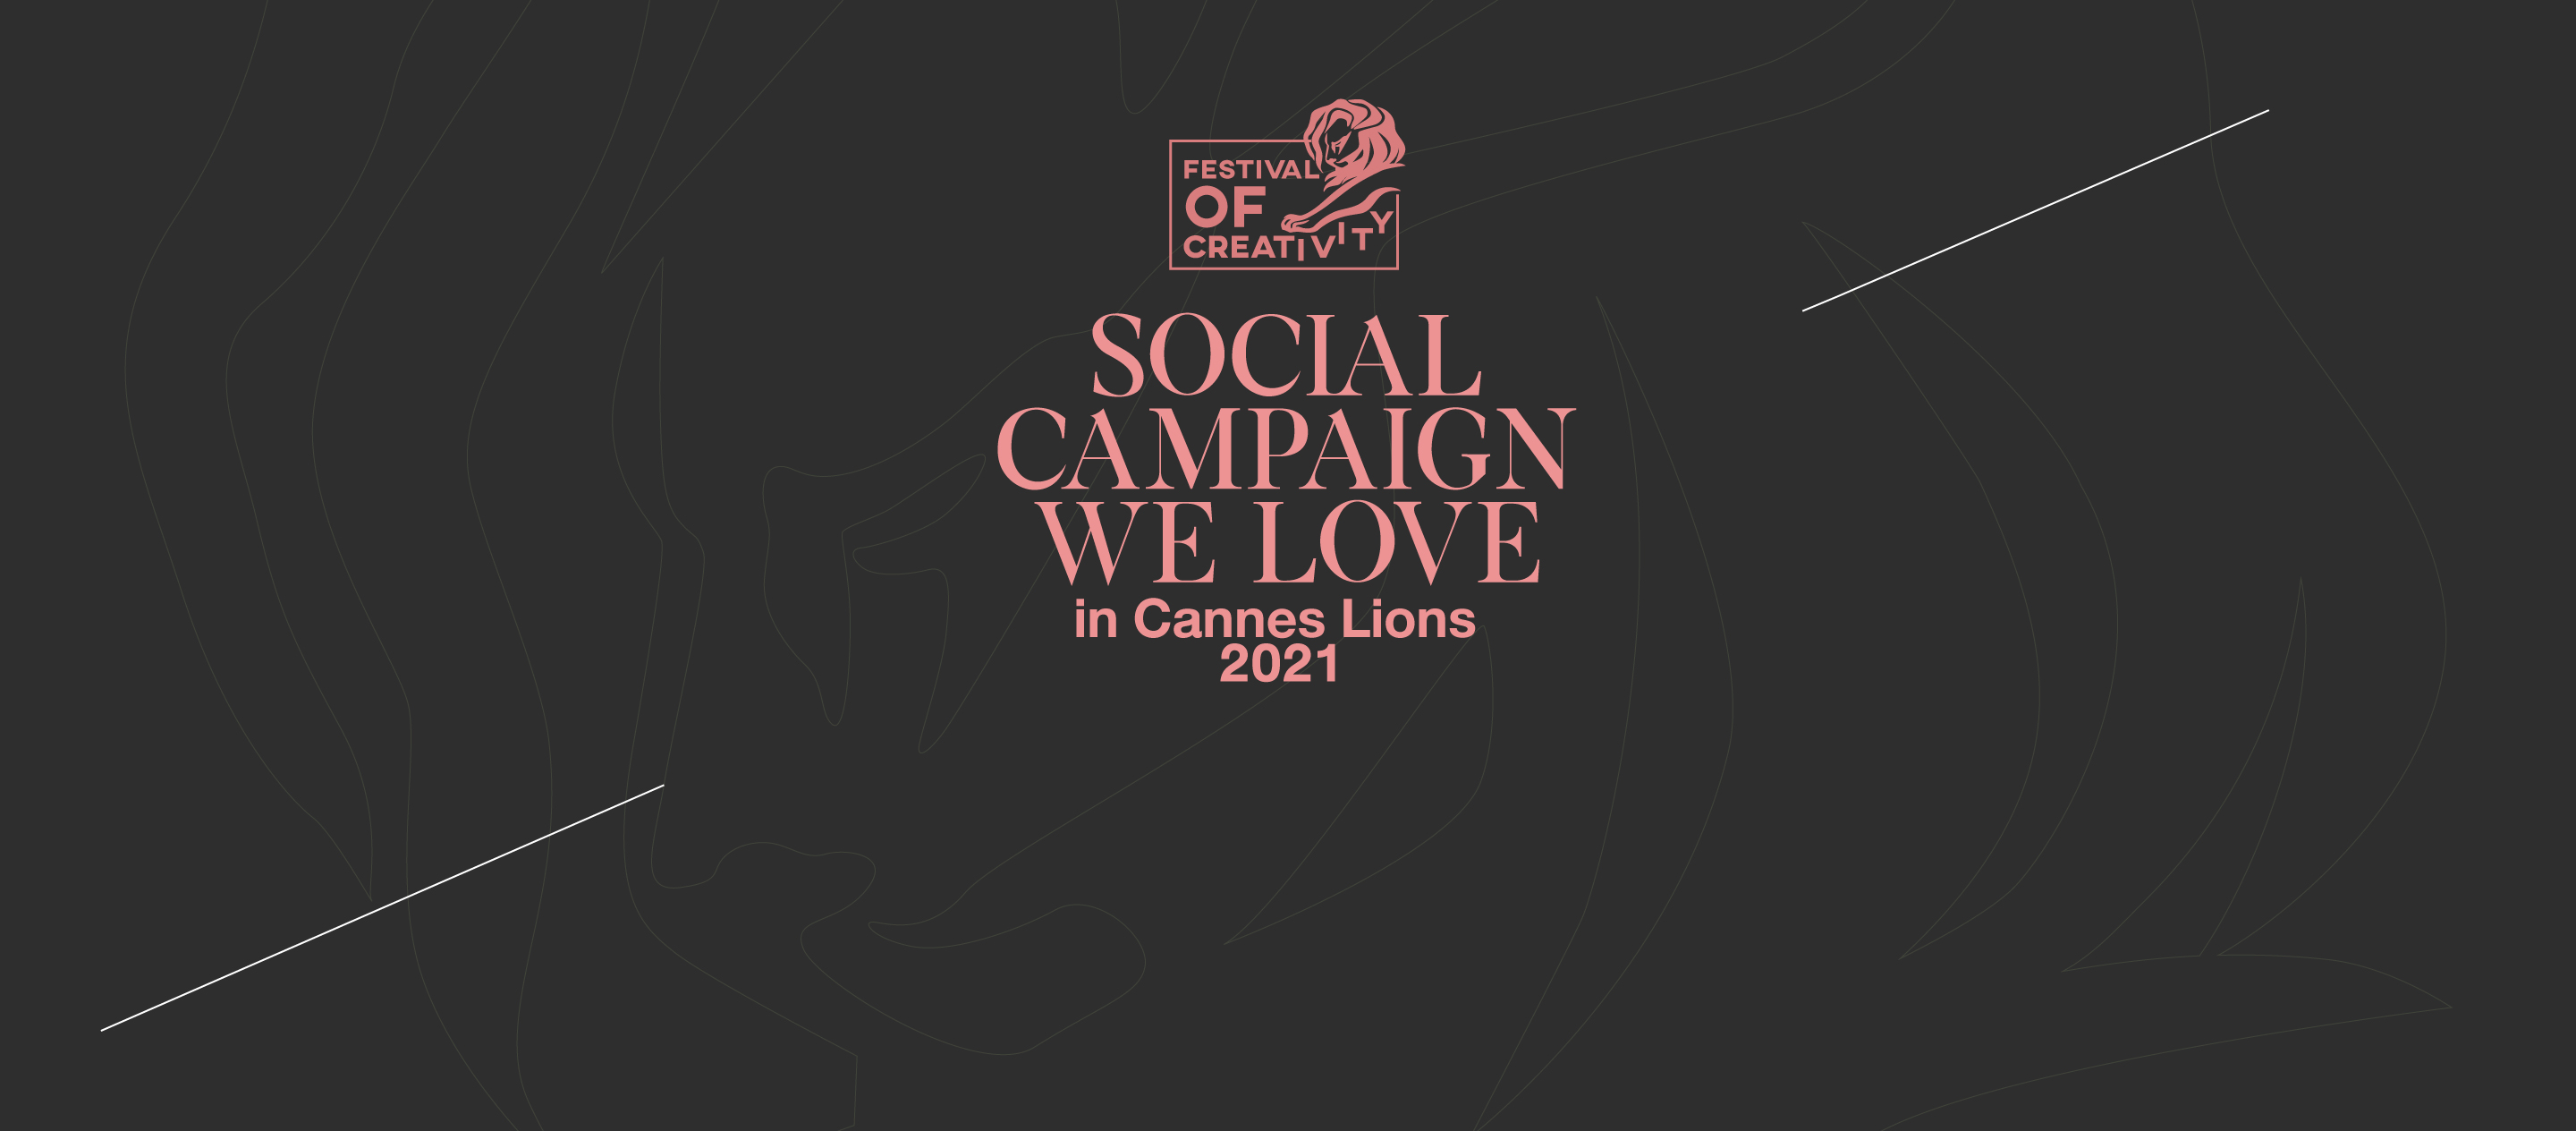 Social campaign we love in Cannes Lions 2021